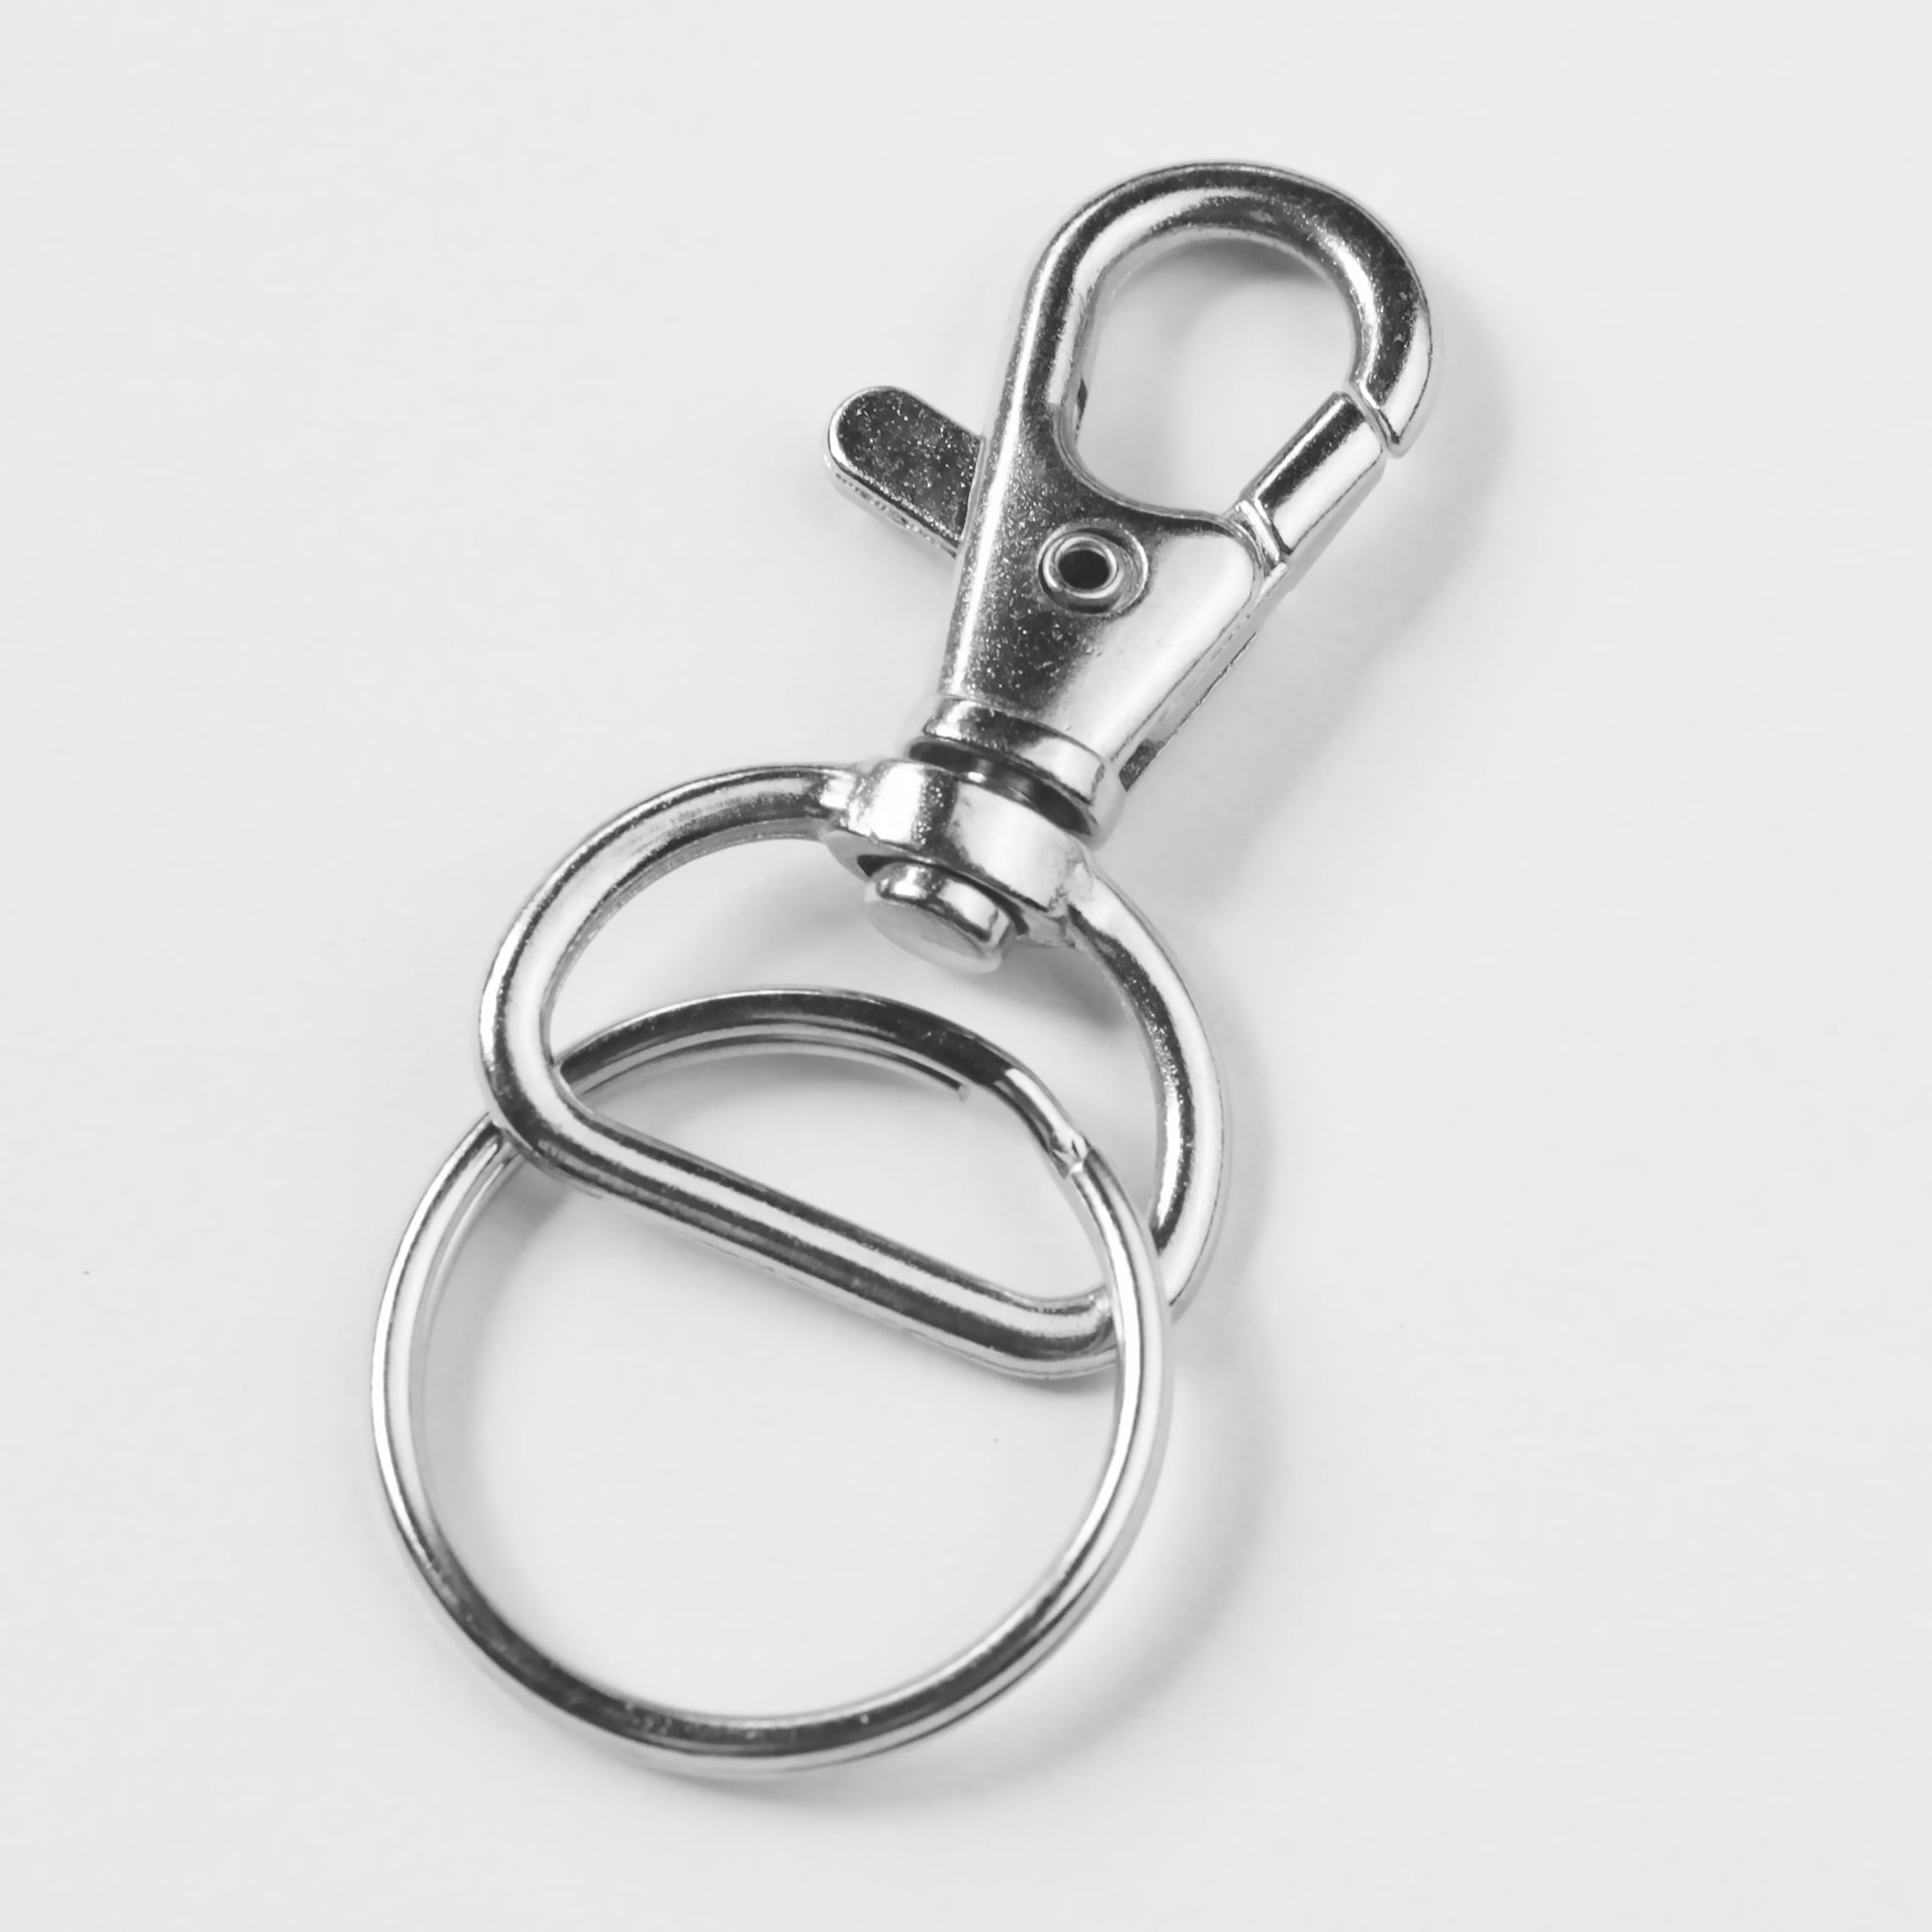 Silver Swivel Lanyard Snap Hooks With Lobster Clasp DIY Silver Keyring For  Him Jewelry Accessories From Shmily2019, $11.75